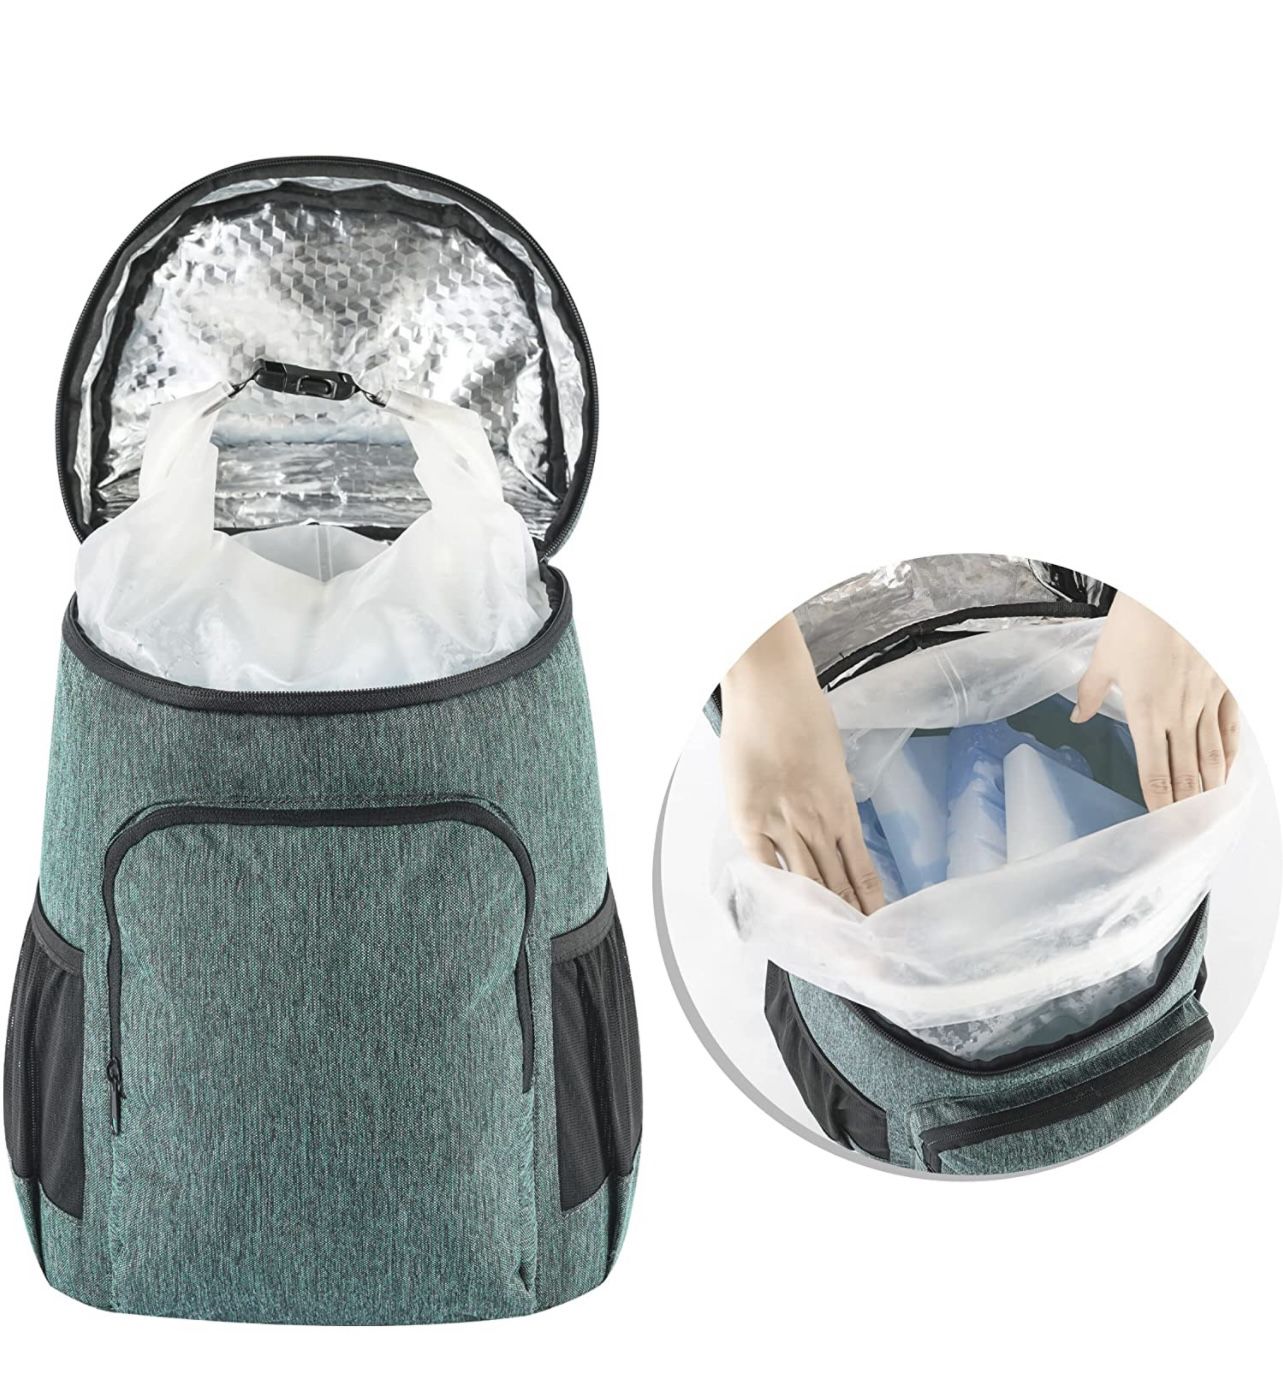 NEW Insulated cooler backpack